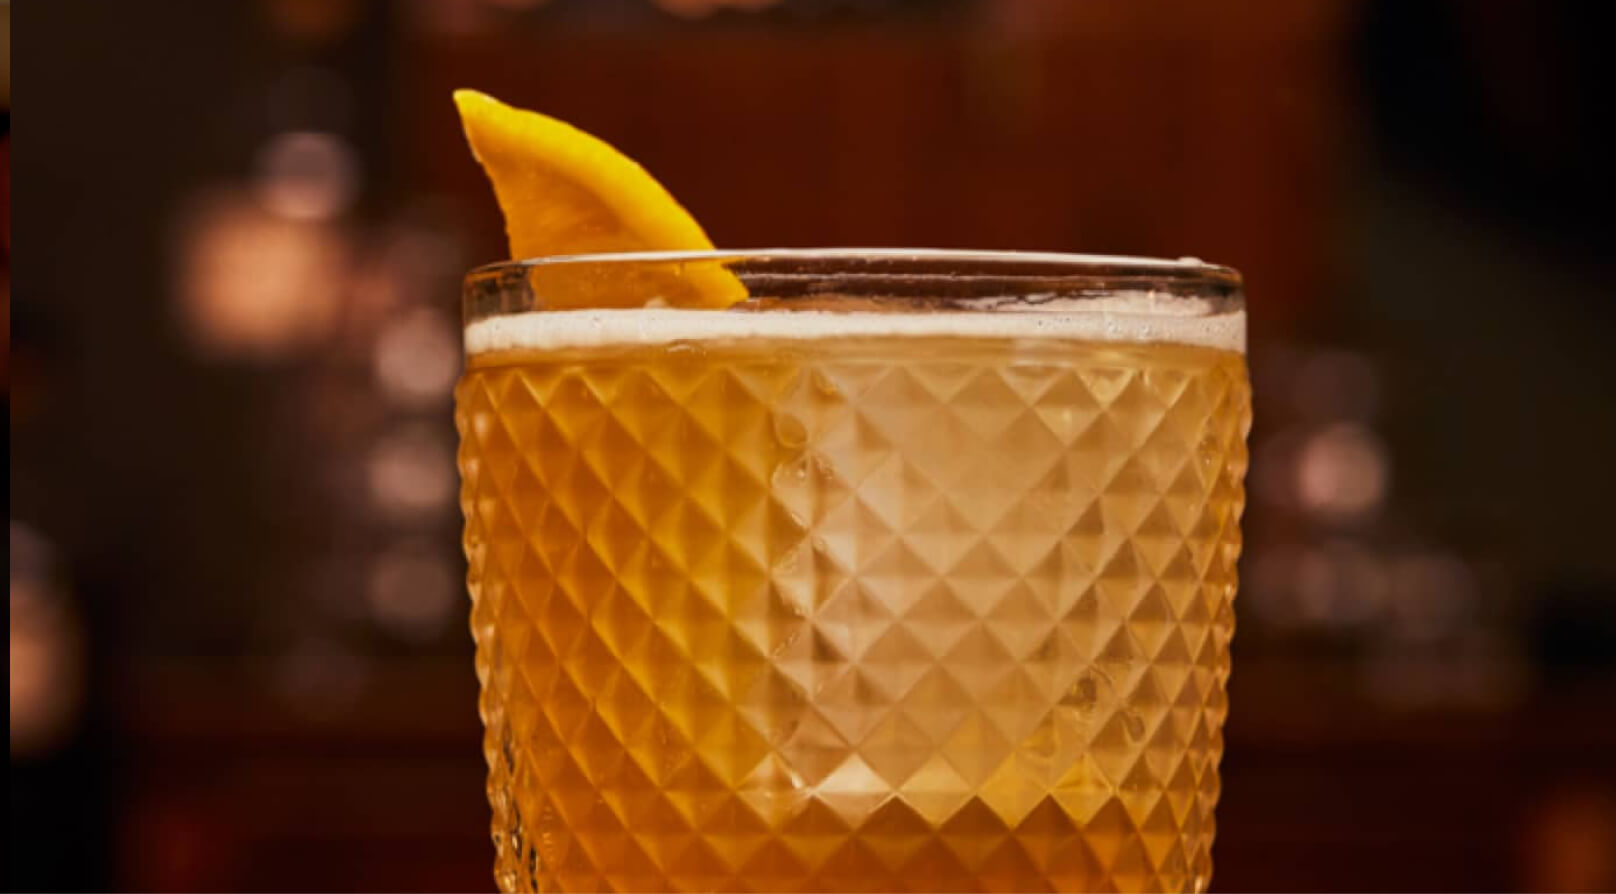 1910 Whisky Fizz whisky cocktail made with Pendleton® Whisky